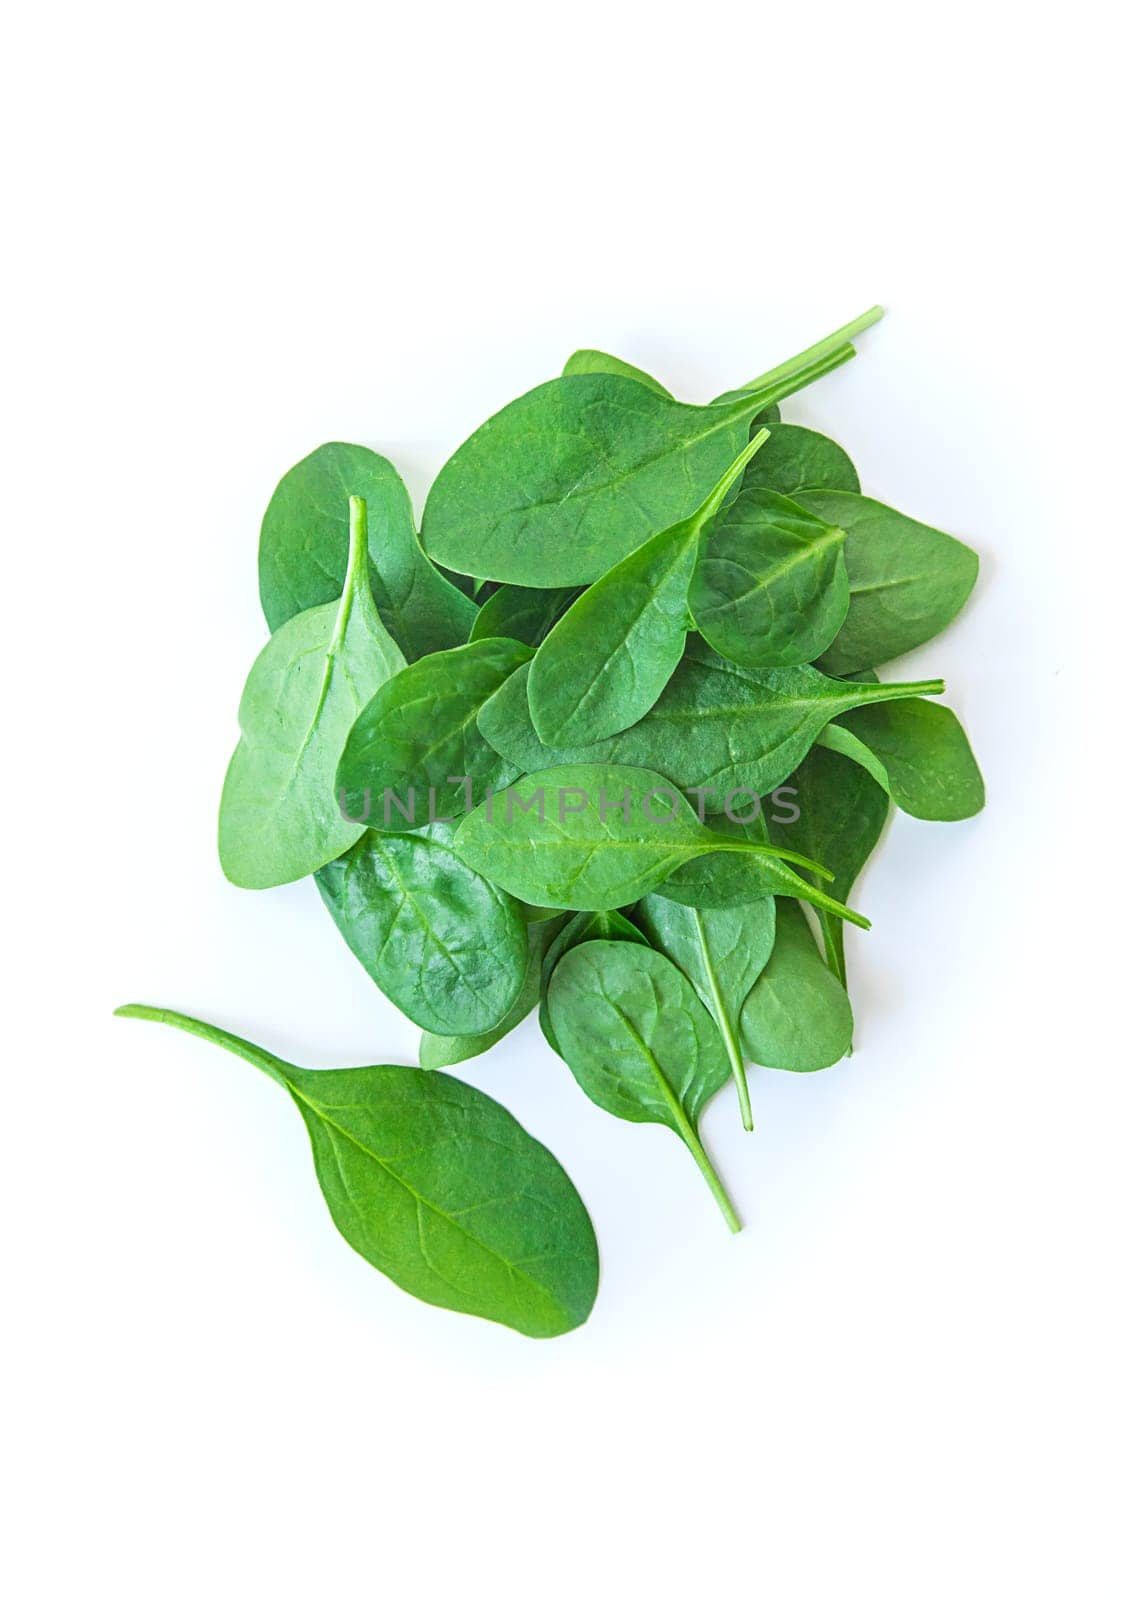 Spinach leaves isolate on white background. Selective focus. Food.